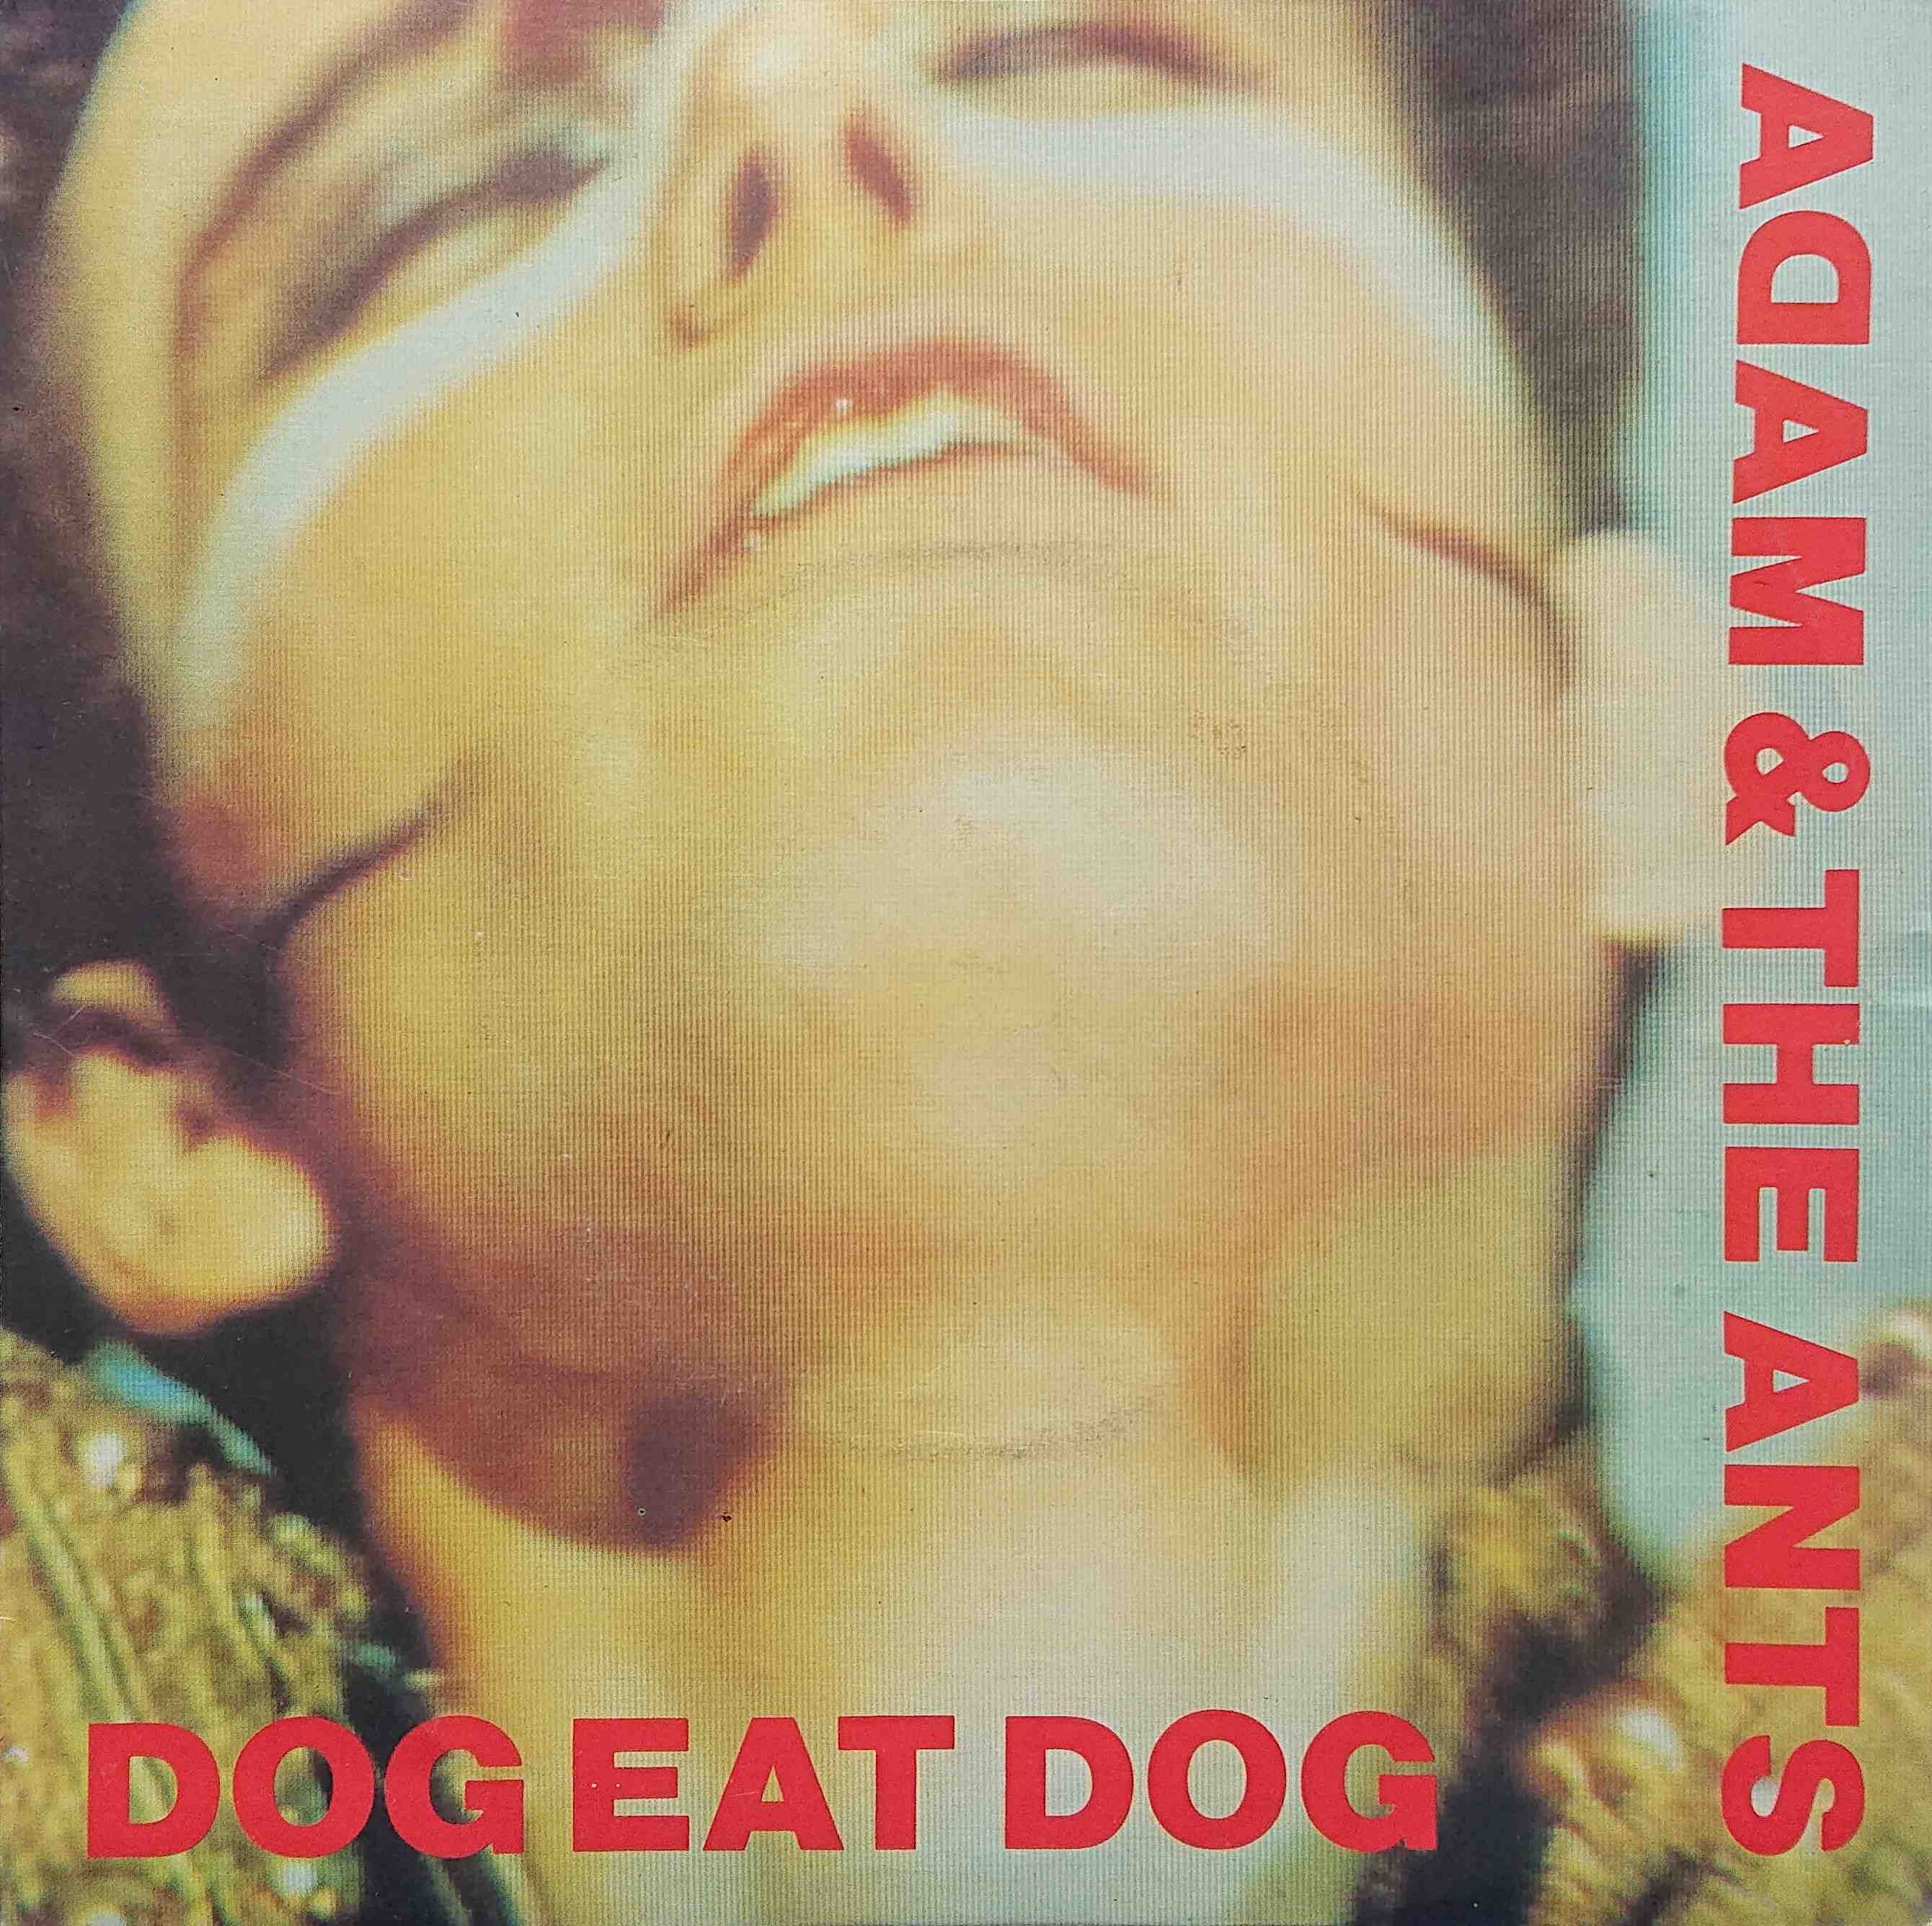 Picture of Dog eat dog by artist Adam and the Ants 